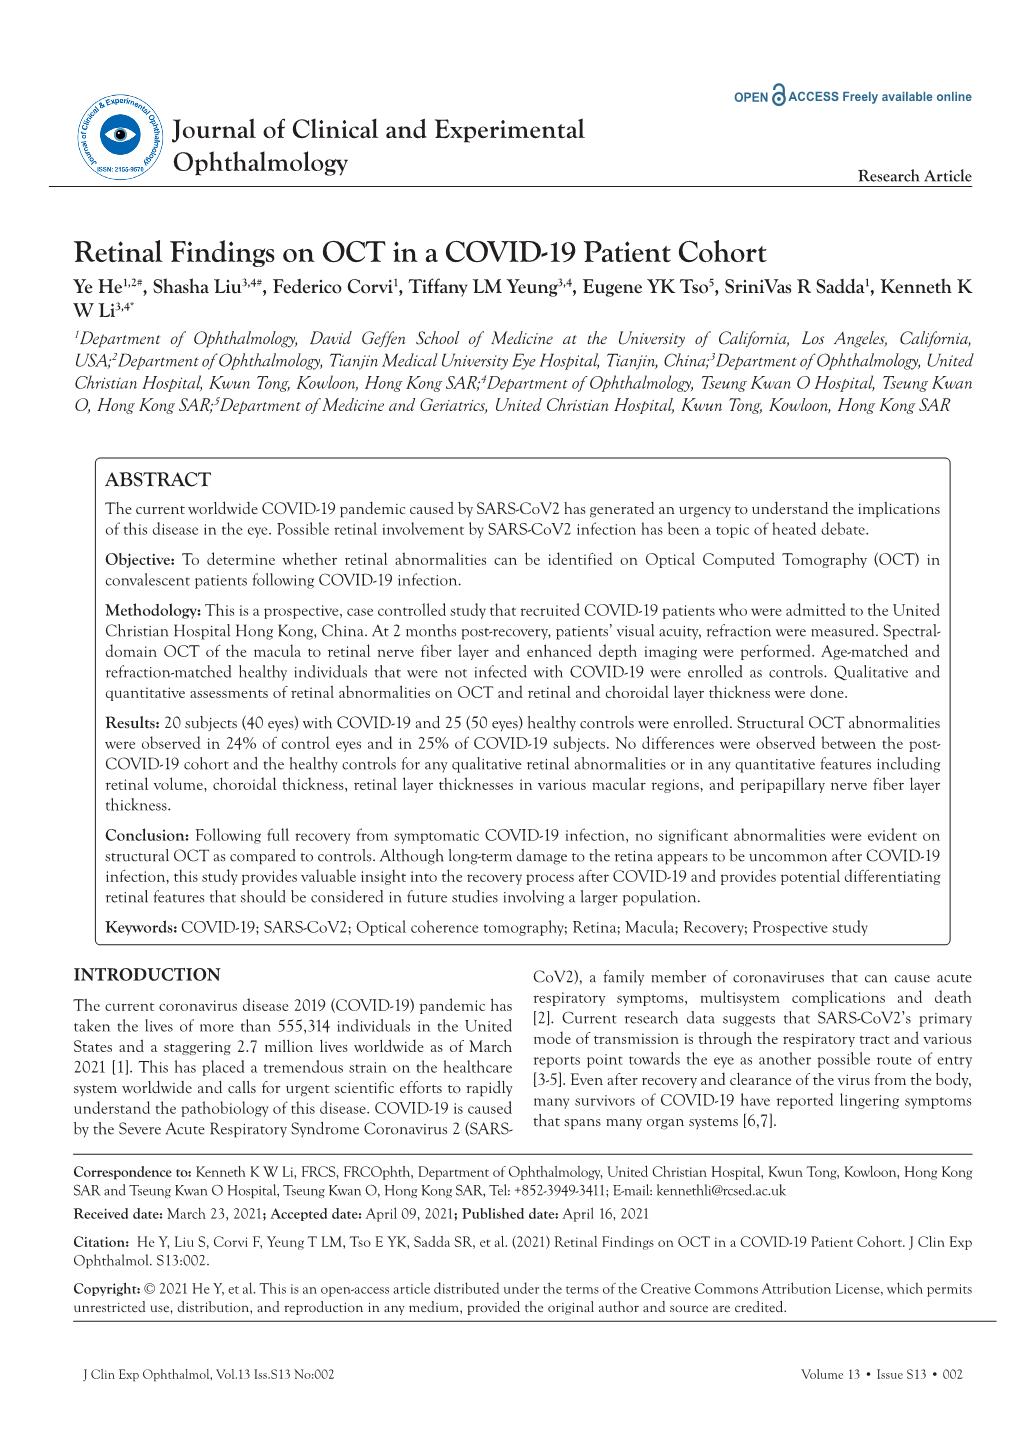 Retinal Findings on OCT in a COVID-19 Patient Cohort